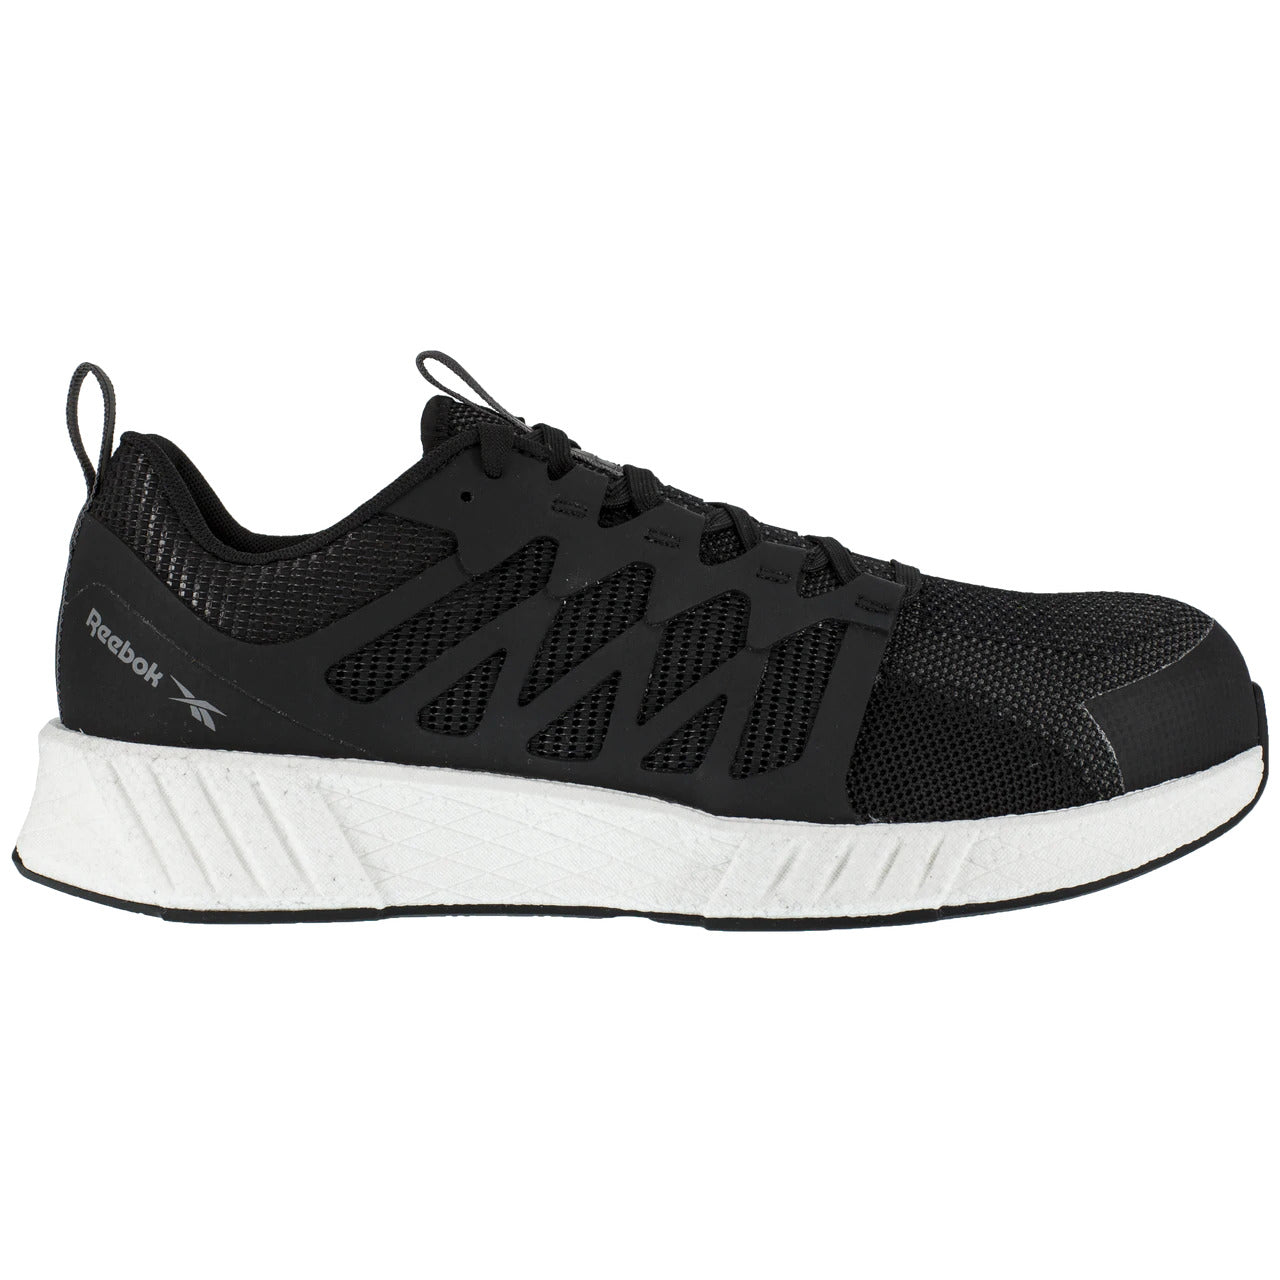 RB4311 FUSION FLEXWEAVE™ WORK - Men's Athletic Composite Toe Work Shoe - Black and White